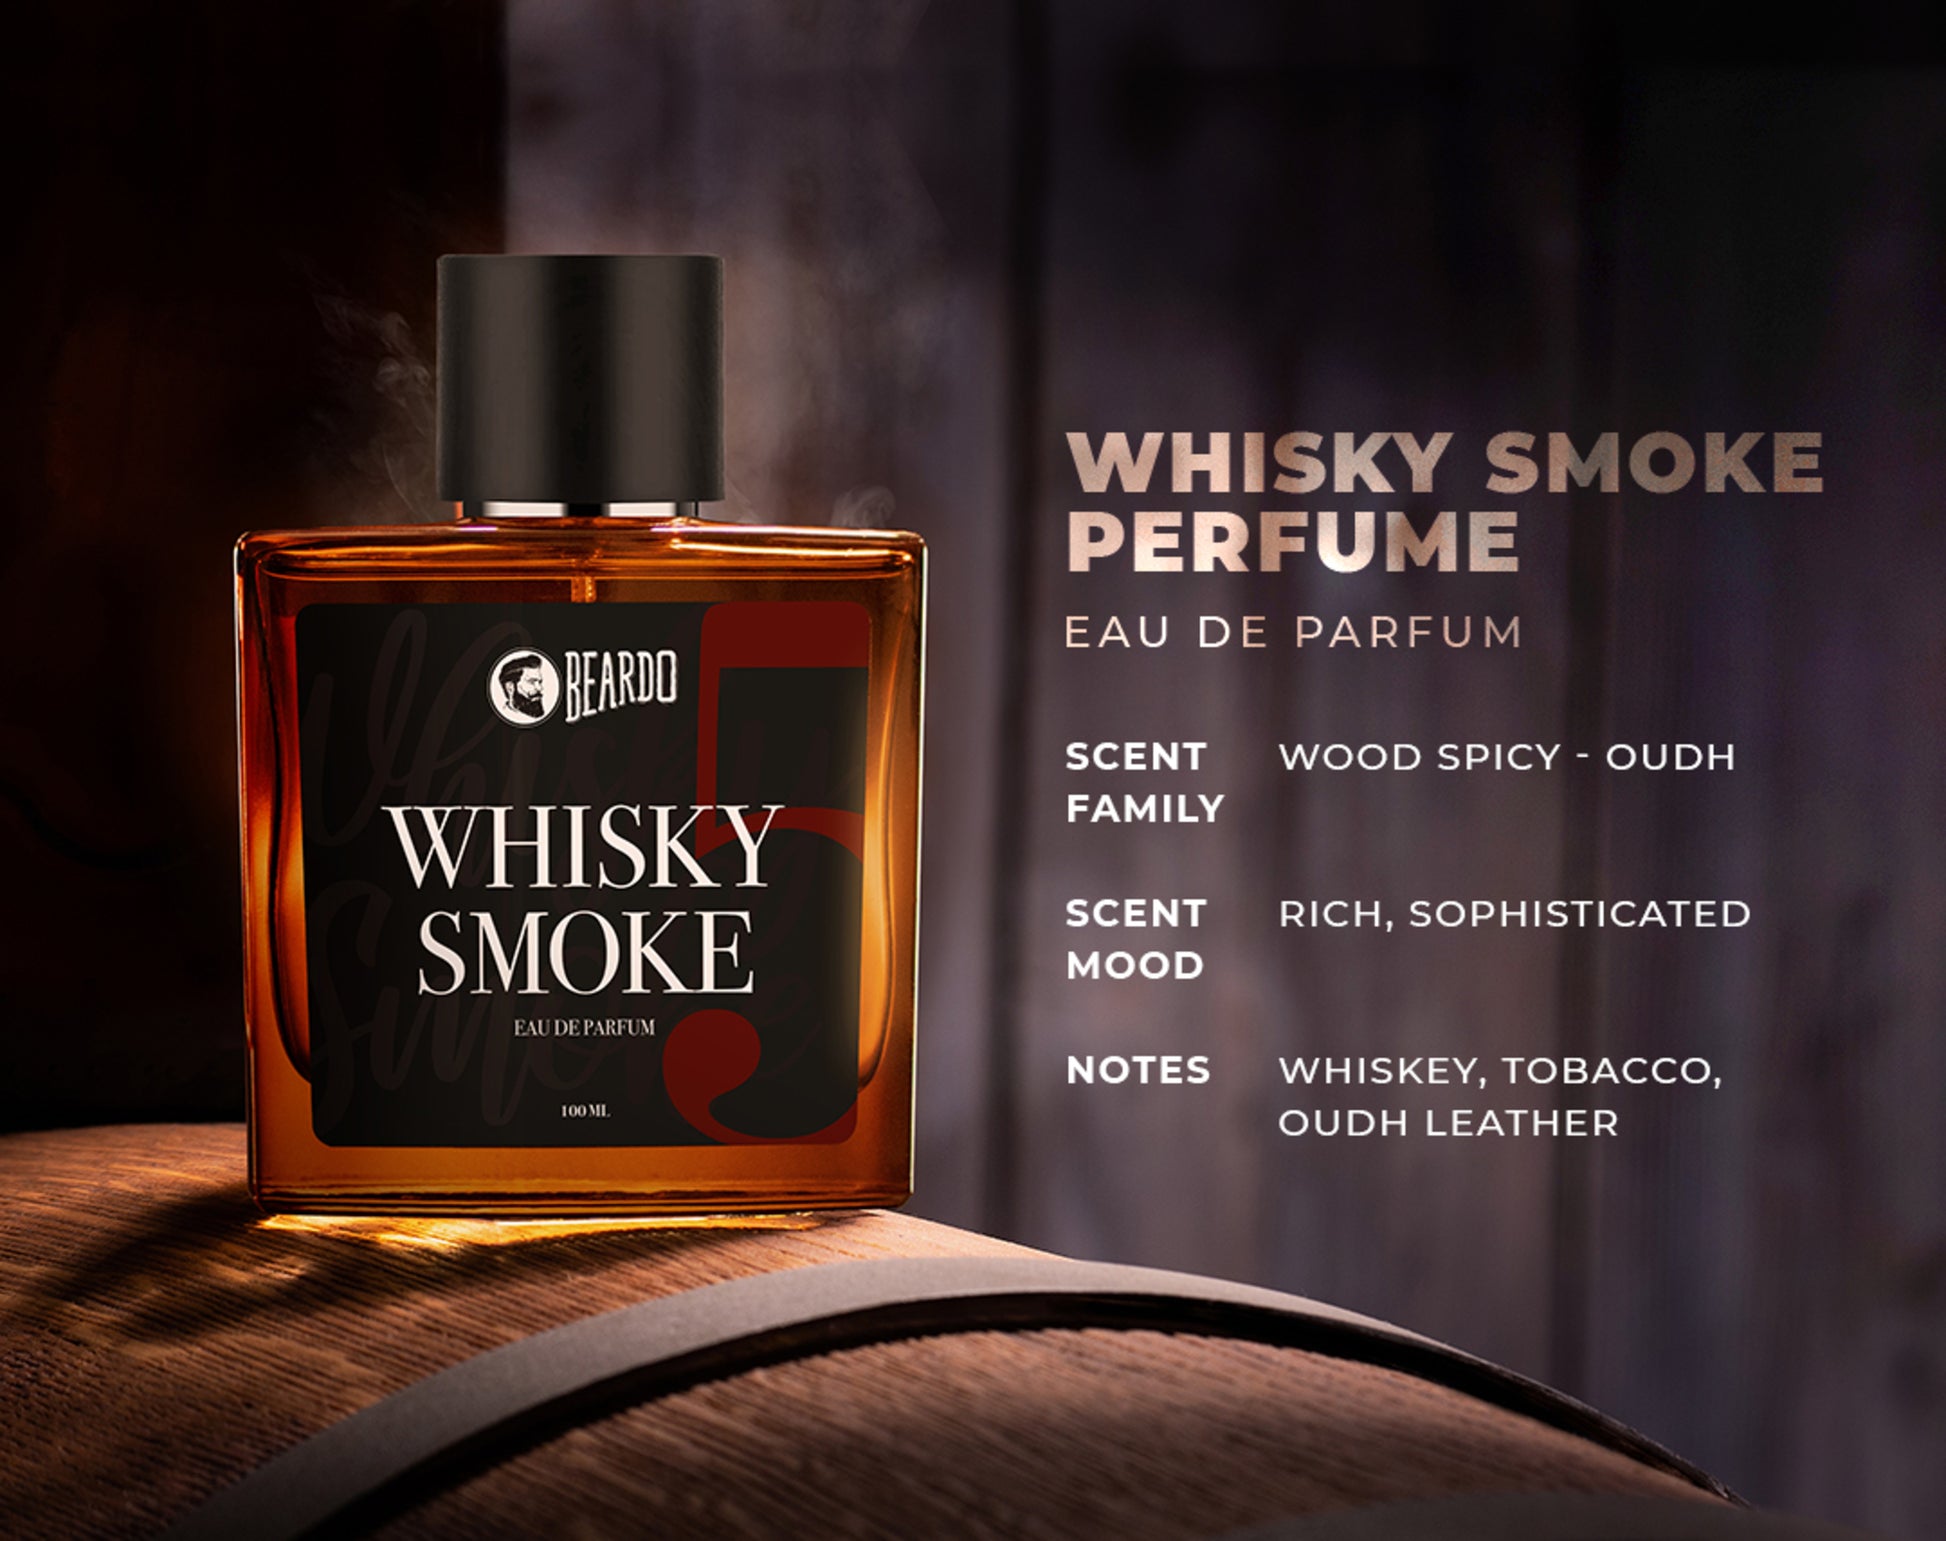 wood spicy ouch, richk, sophisticated, whiskey, tobacco